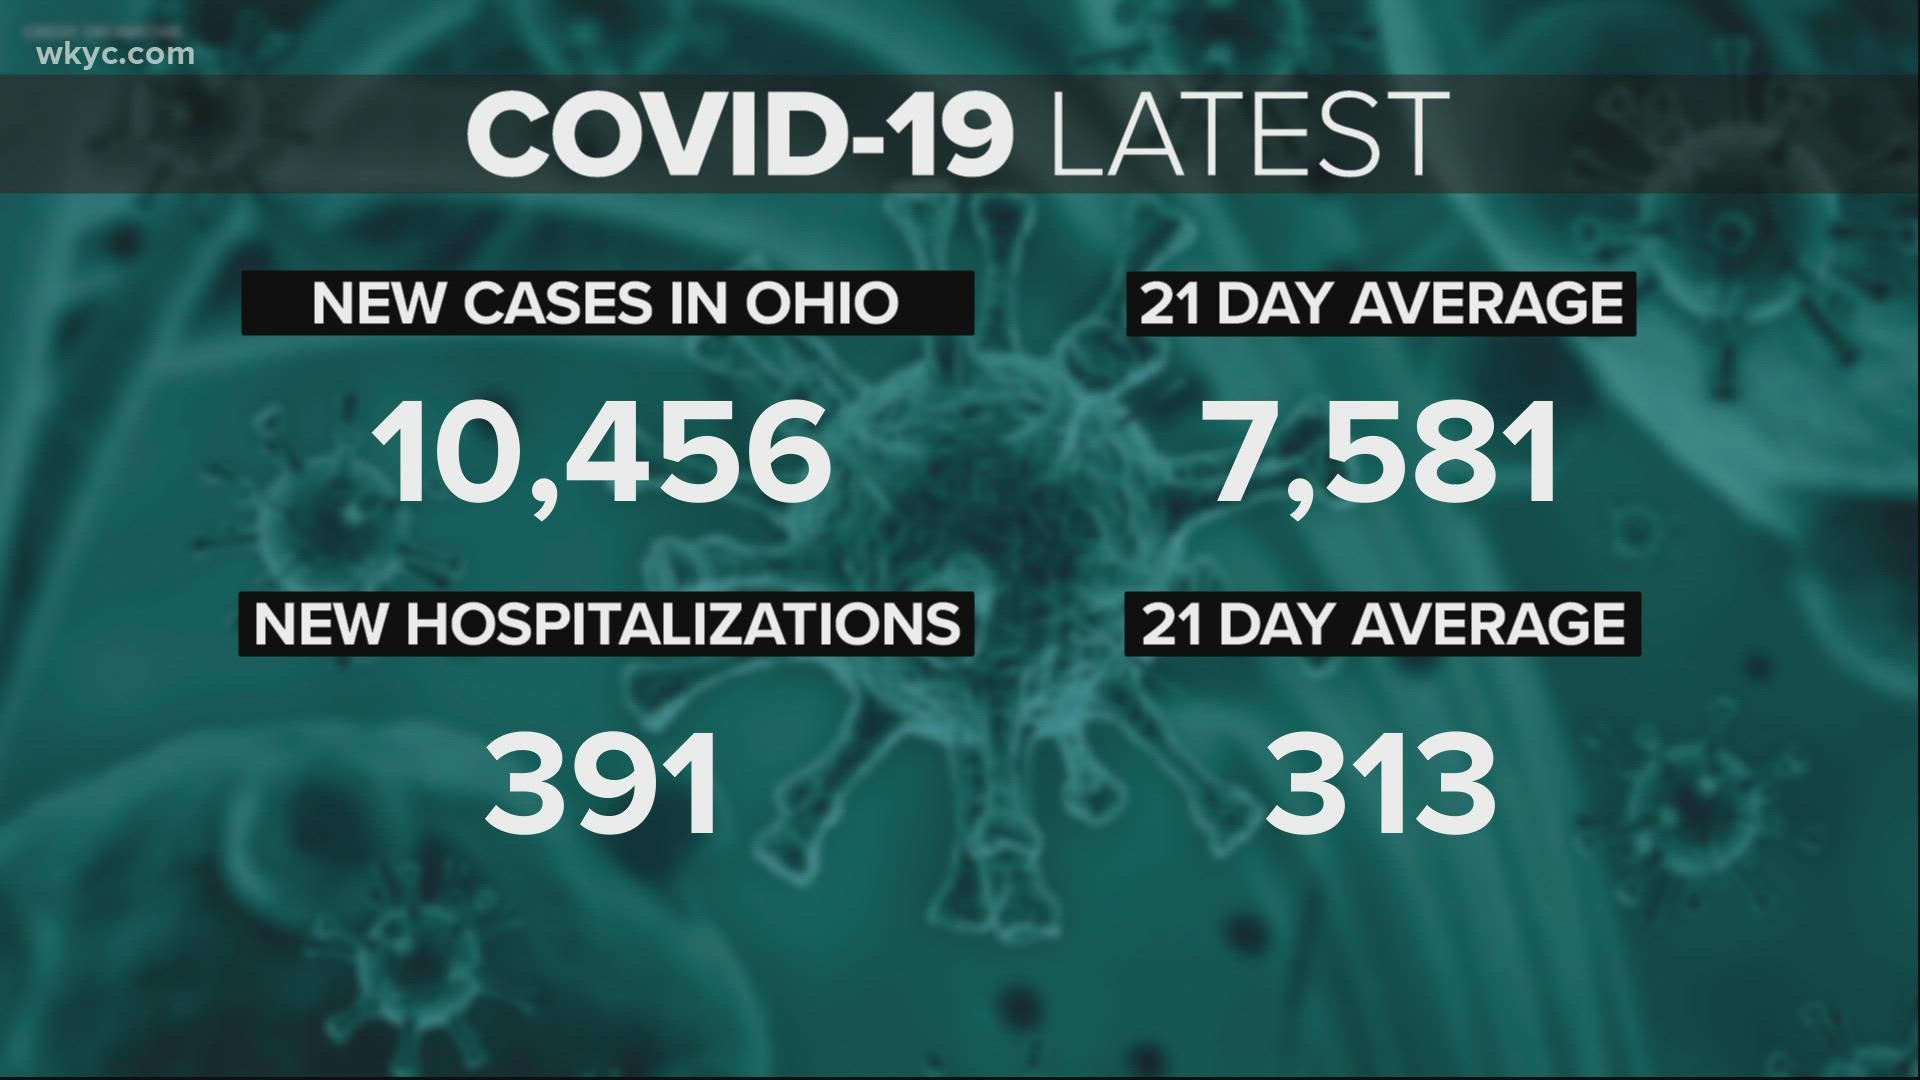 With Christmas quickly approaching, the state of Ohio is experiencing a growing number of COVID-19 infections and hospitalizations.